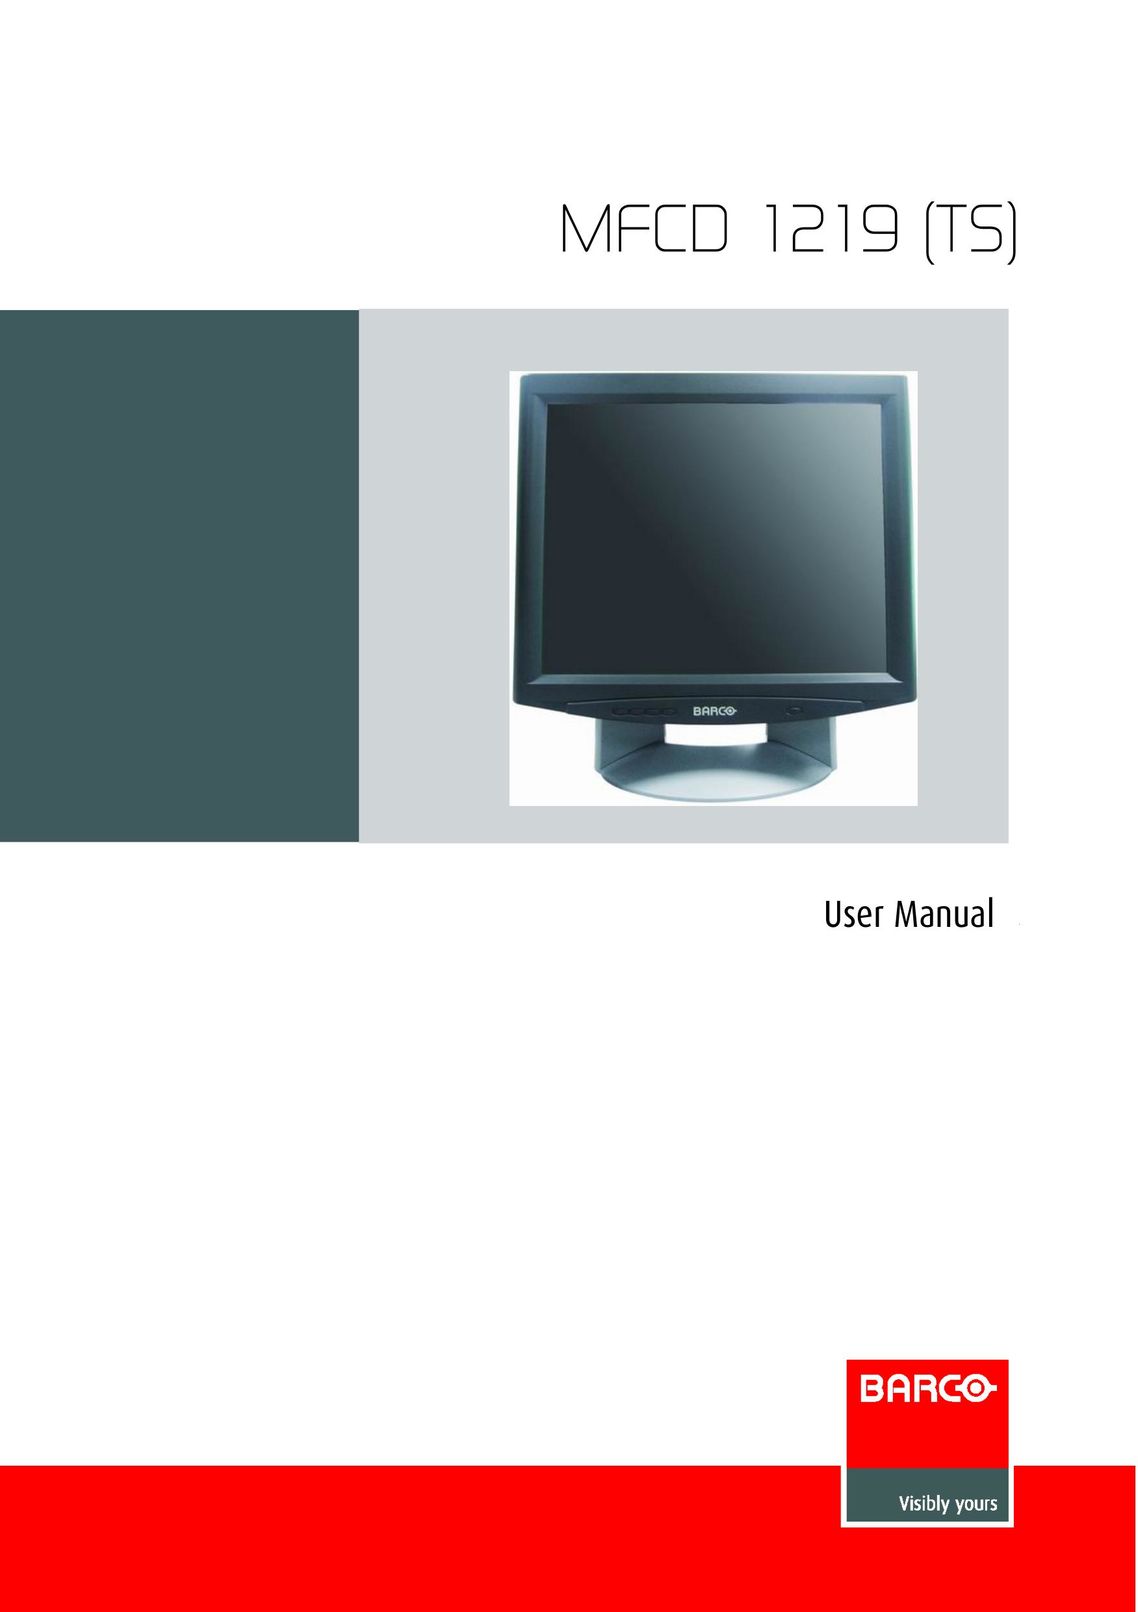 Barco MFCD 1219 (TS) CRT Television User Manual